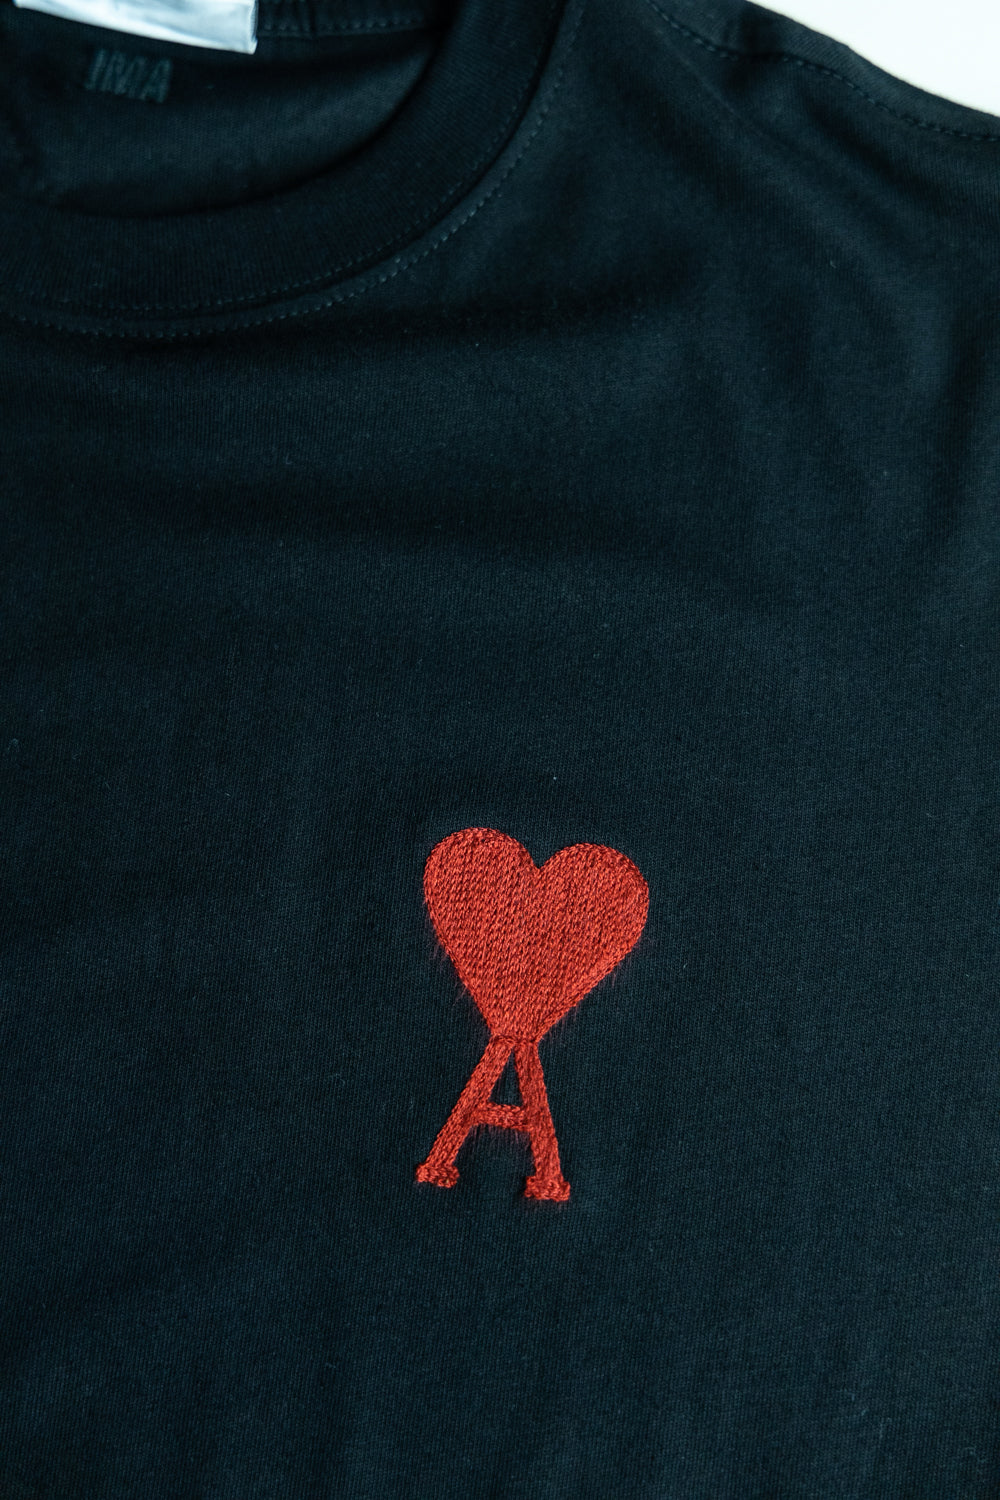 Ami Paris Black Tee Whith Big Red Heart Logo Embroidered